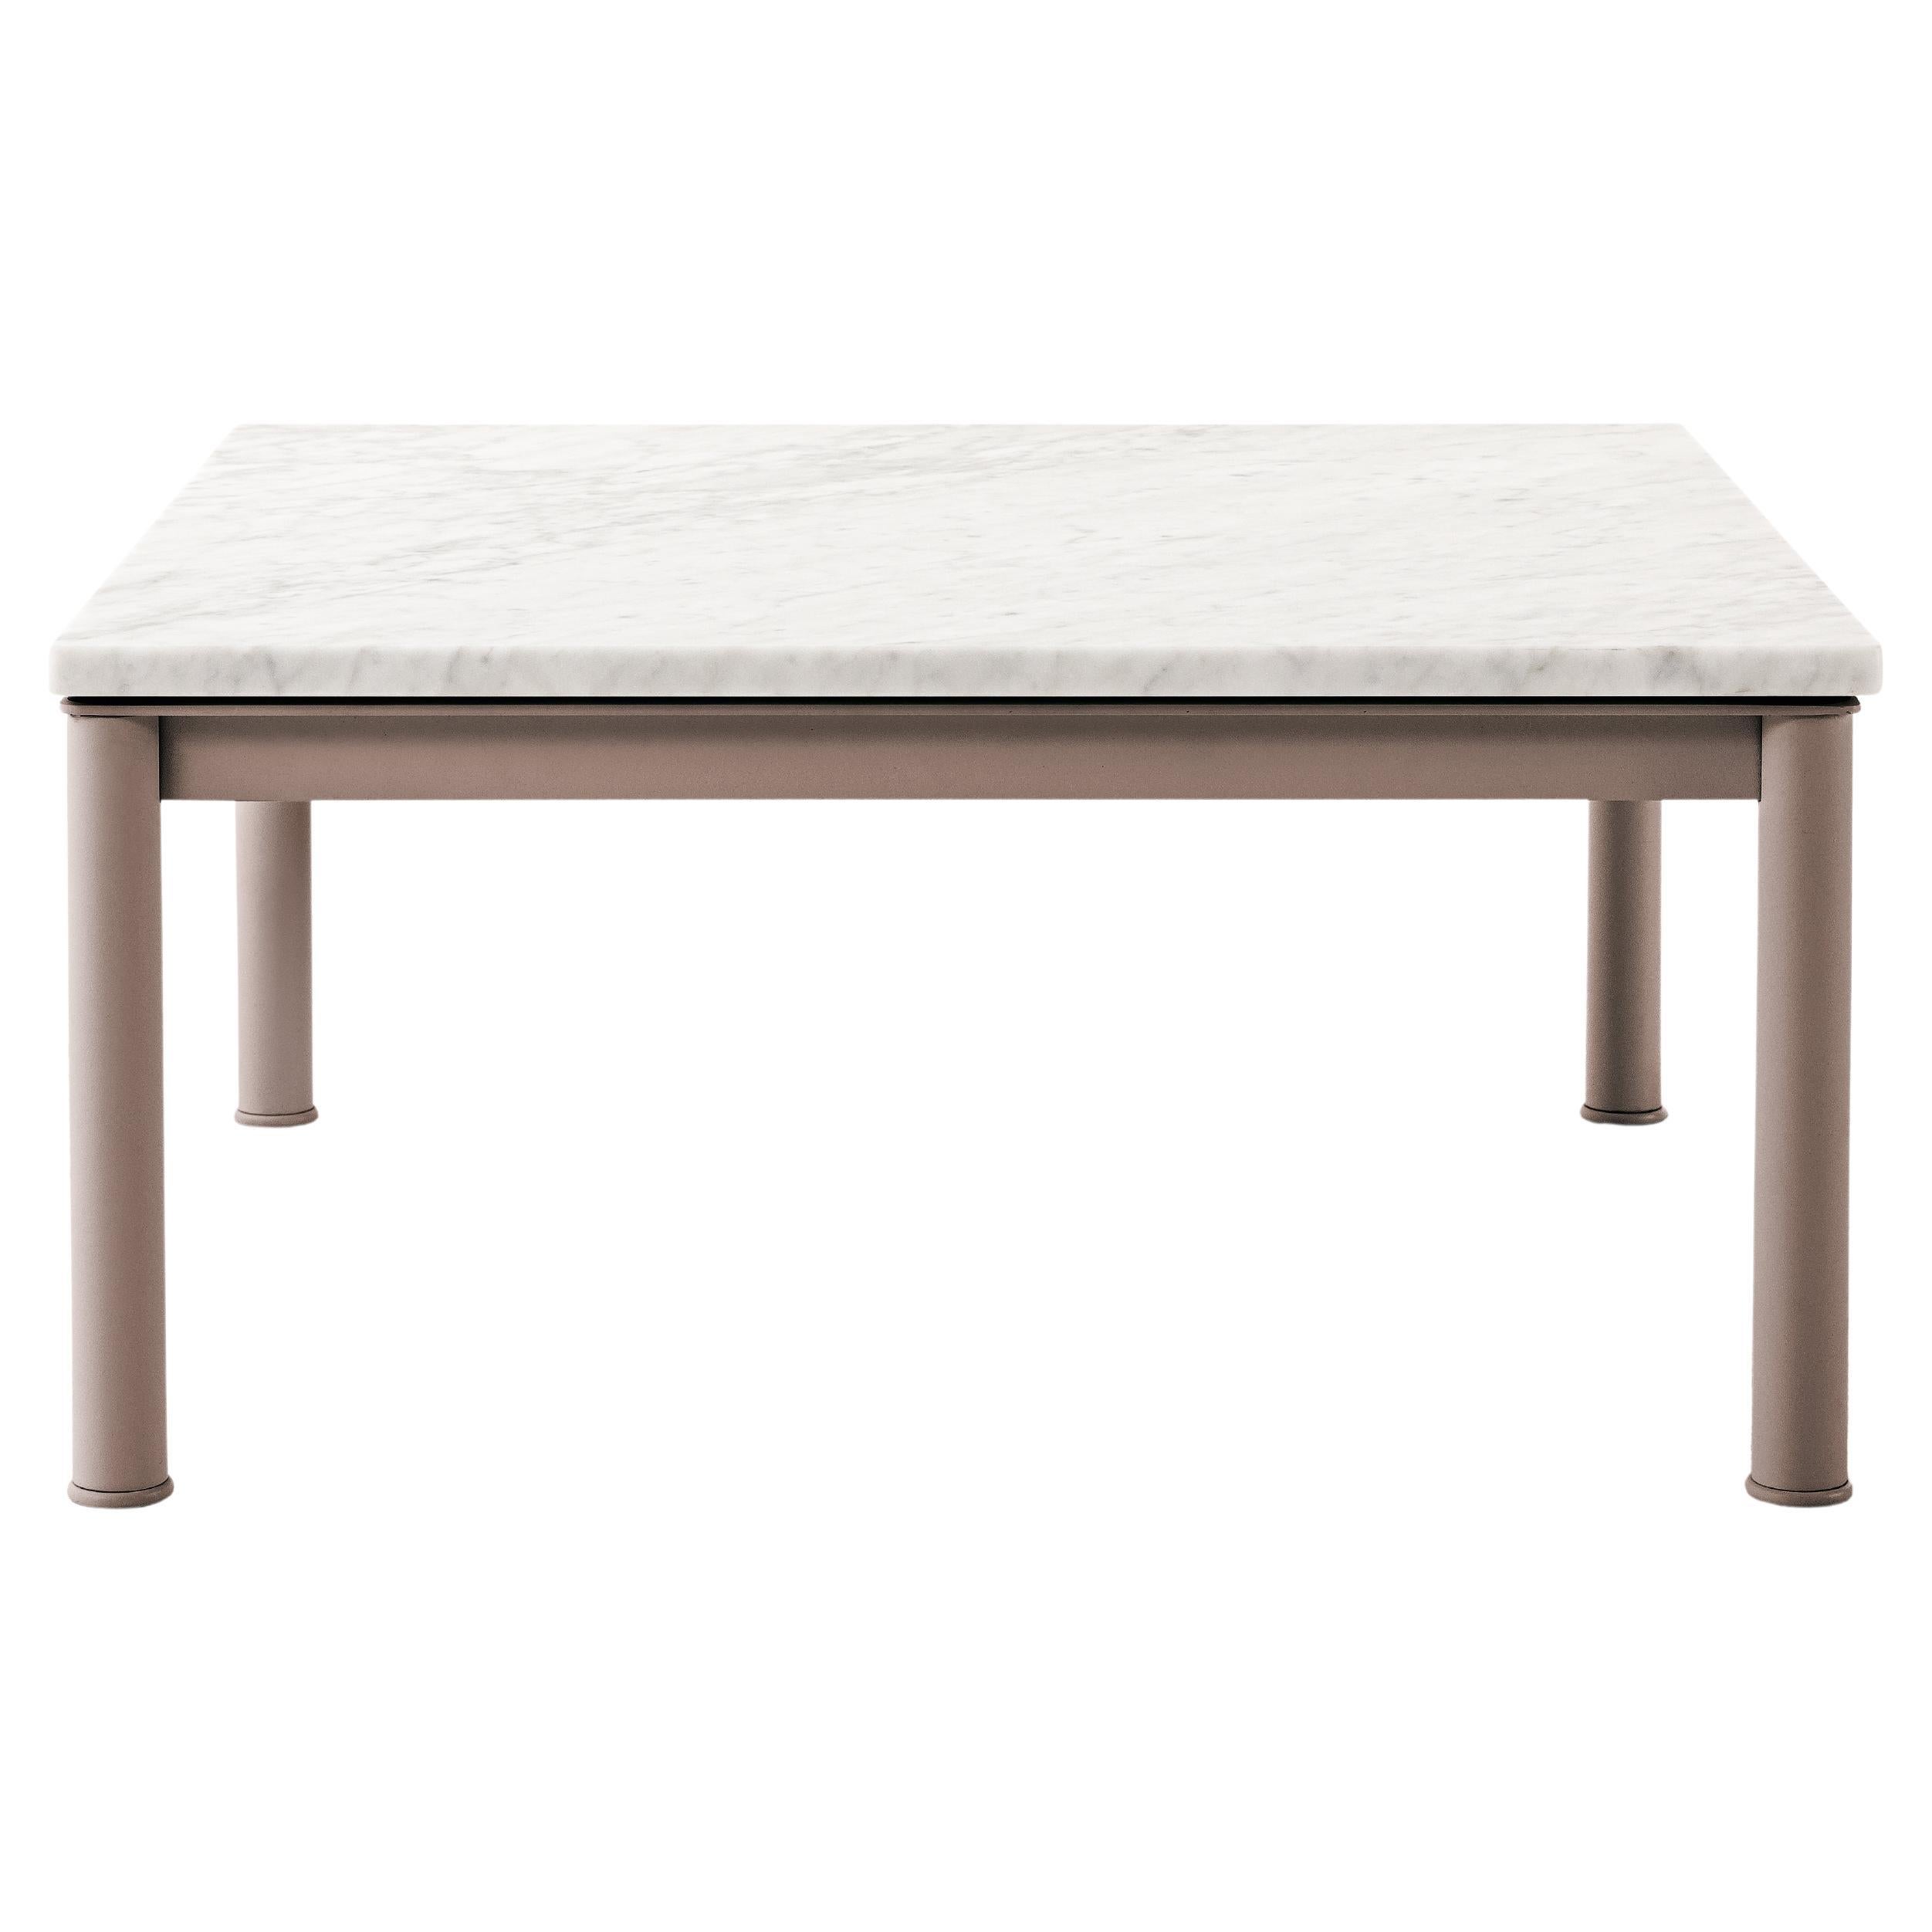 Le Corbusier, Pierre Jeanneret, Charlotte Perriand LC10 T5 Mud Table by Cassina For Sale